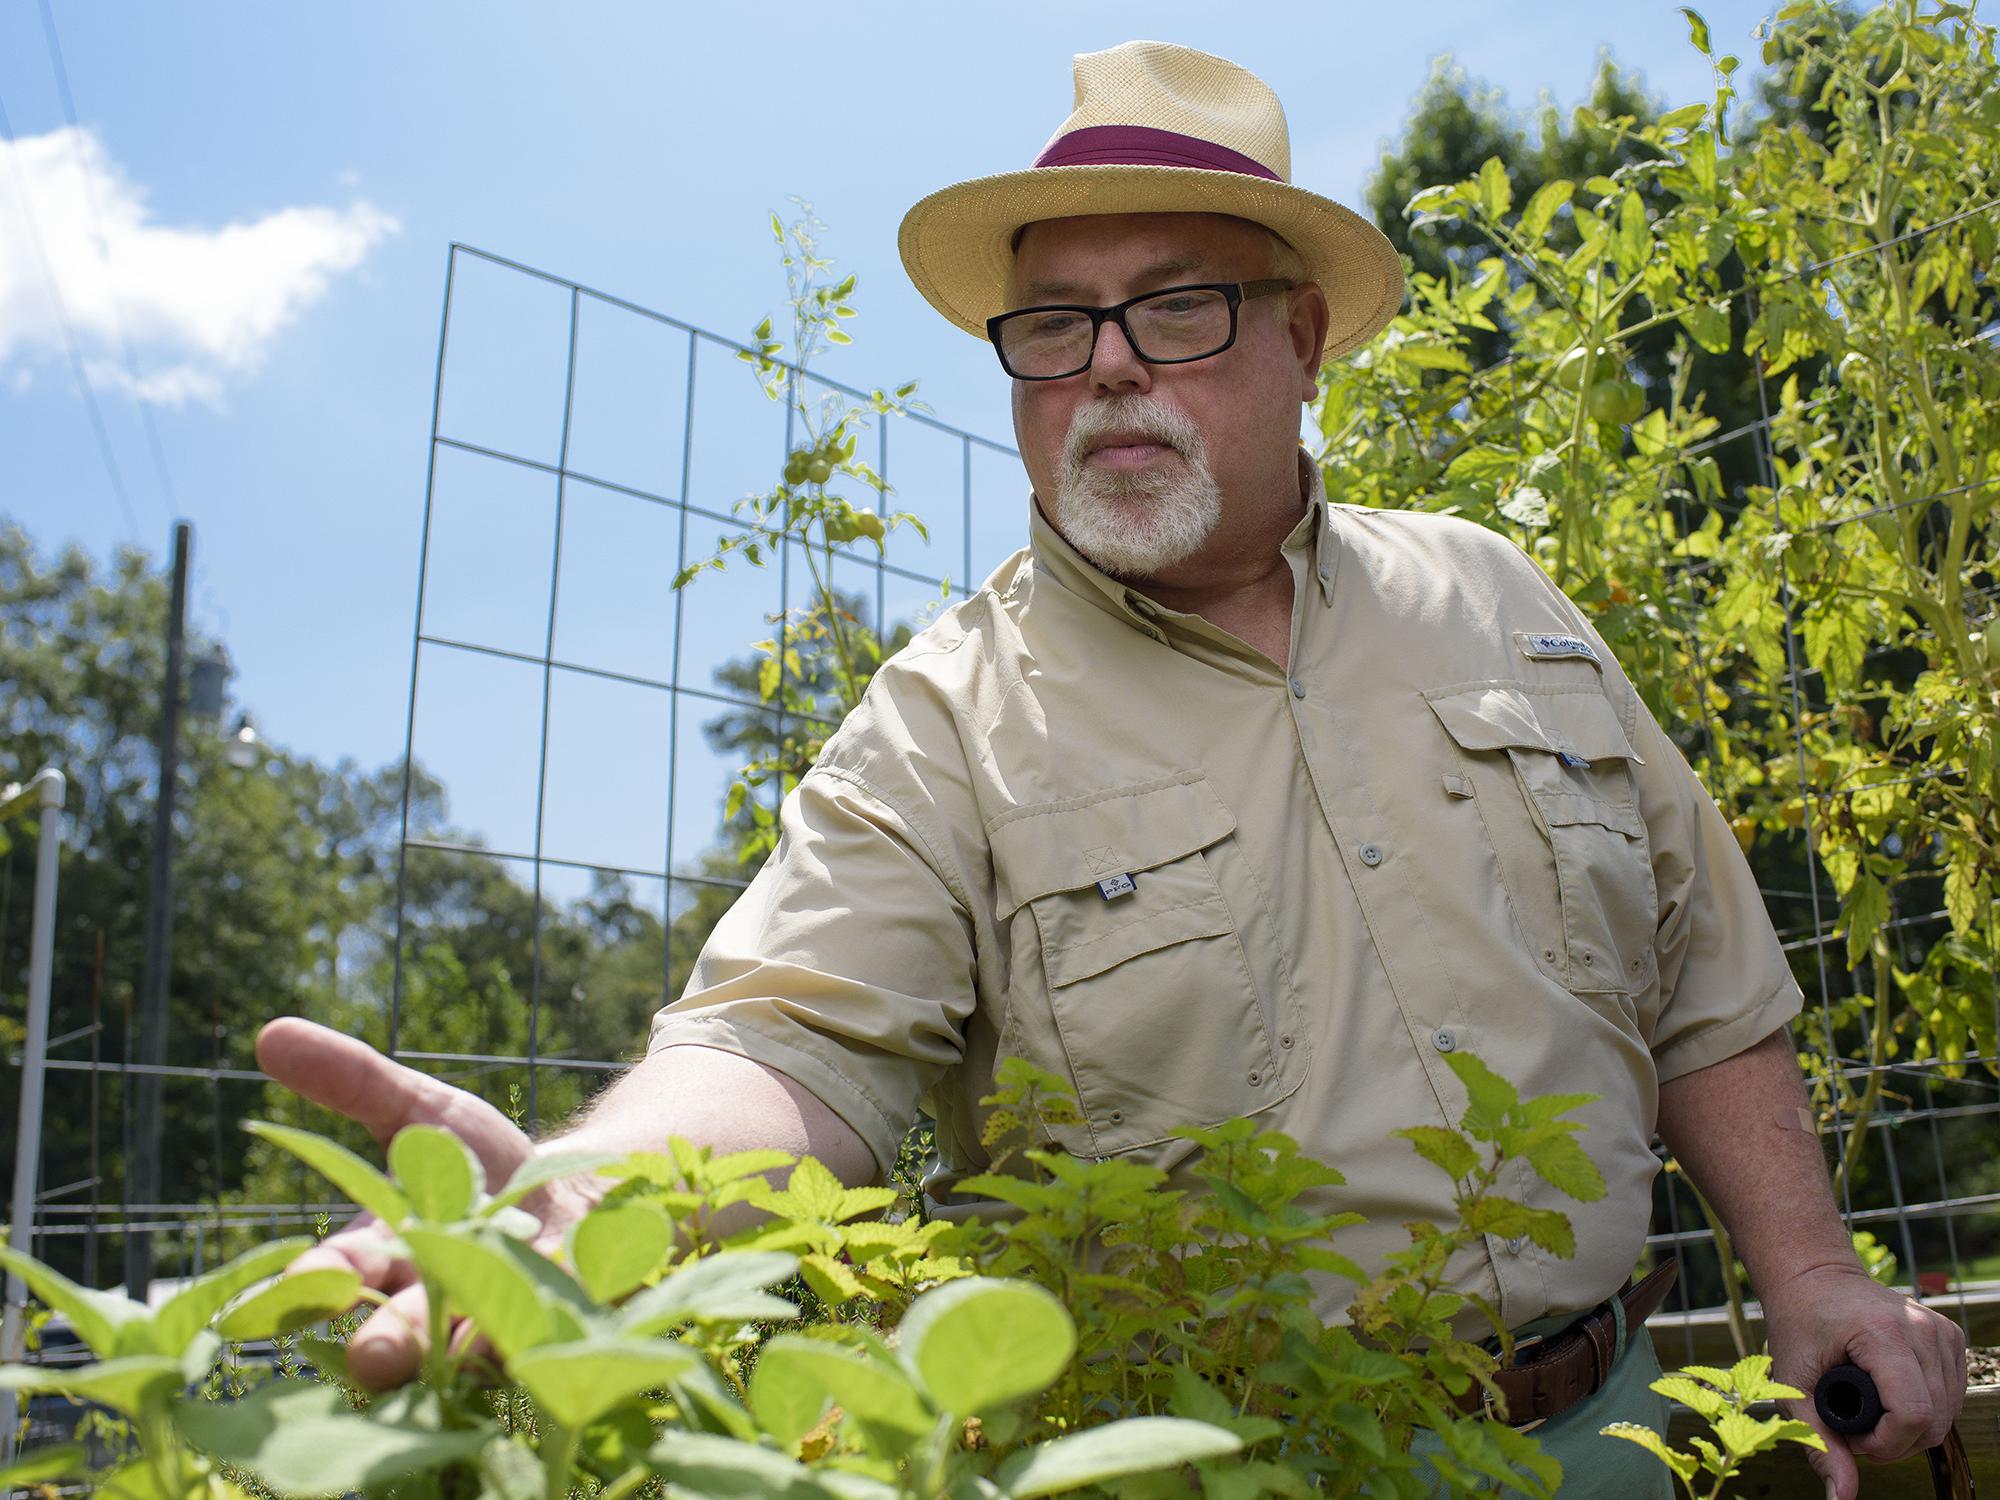 Hattiesburg pharmacist Jim Murray grows vegetables and herbs on a salad table. The raised plant beds are built and distributed by Master Gardener volunteers trained by the Mississippi State University Extension Service. (Photo by MSU Extension Service/Kevin Hudson)